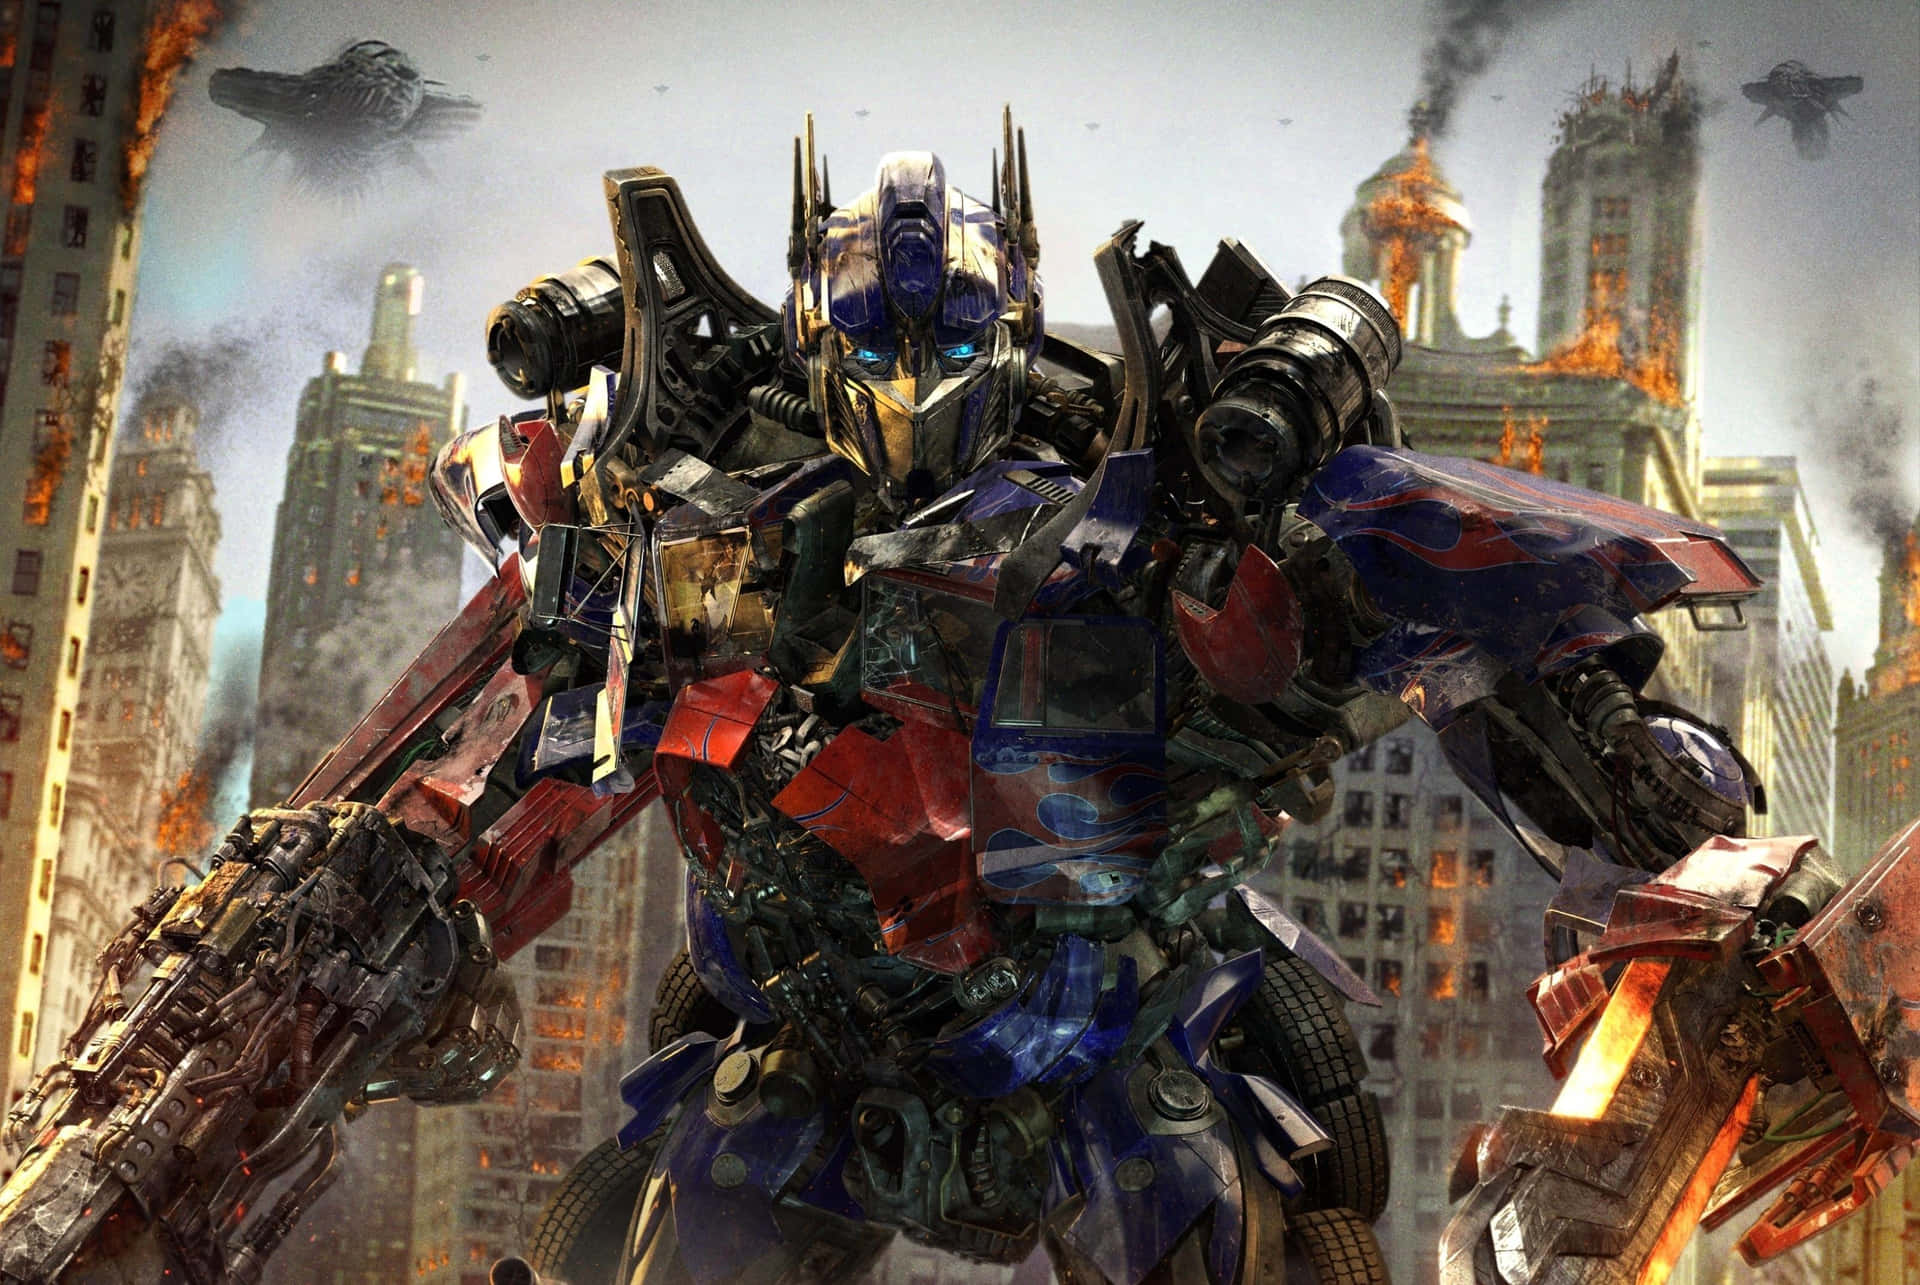 Optimus Prime from Transformers